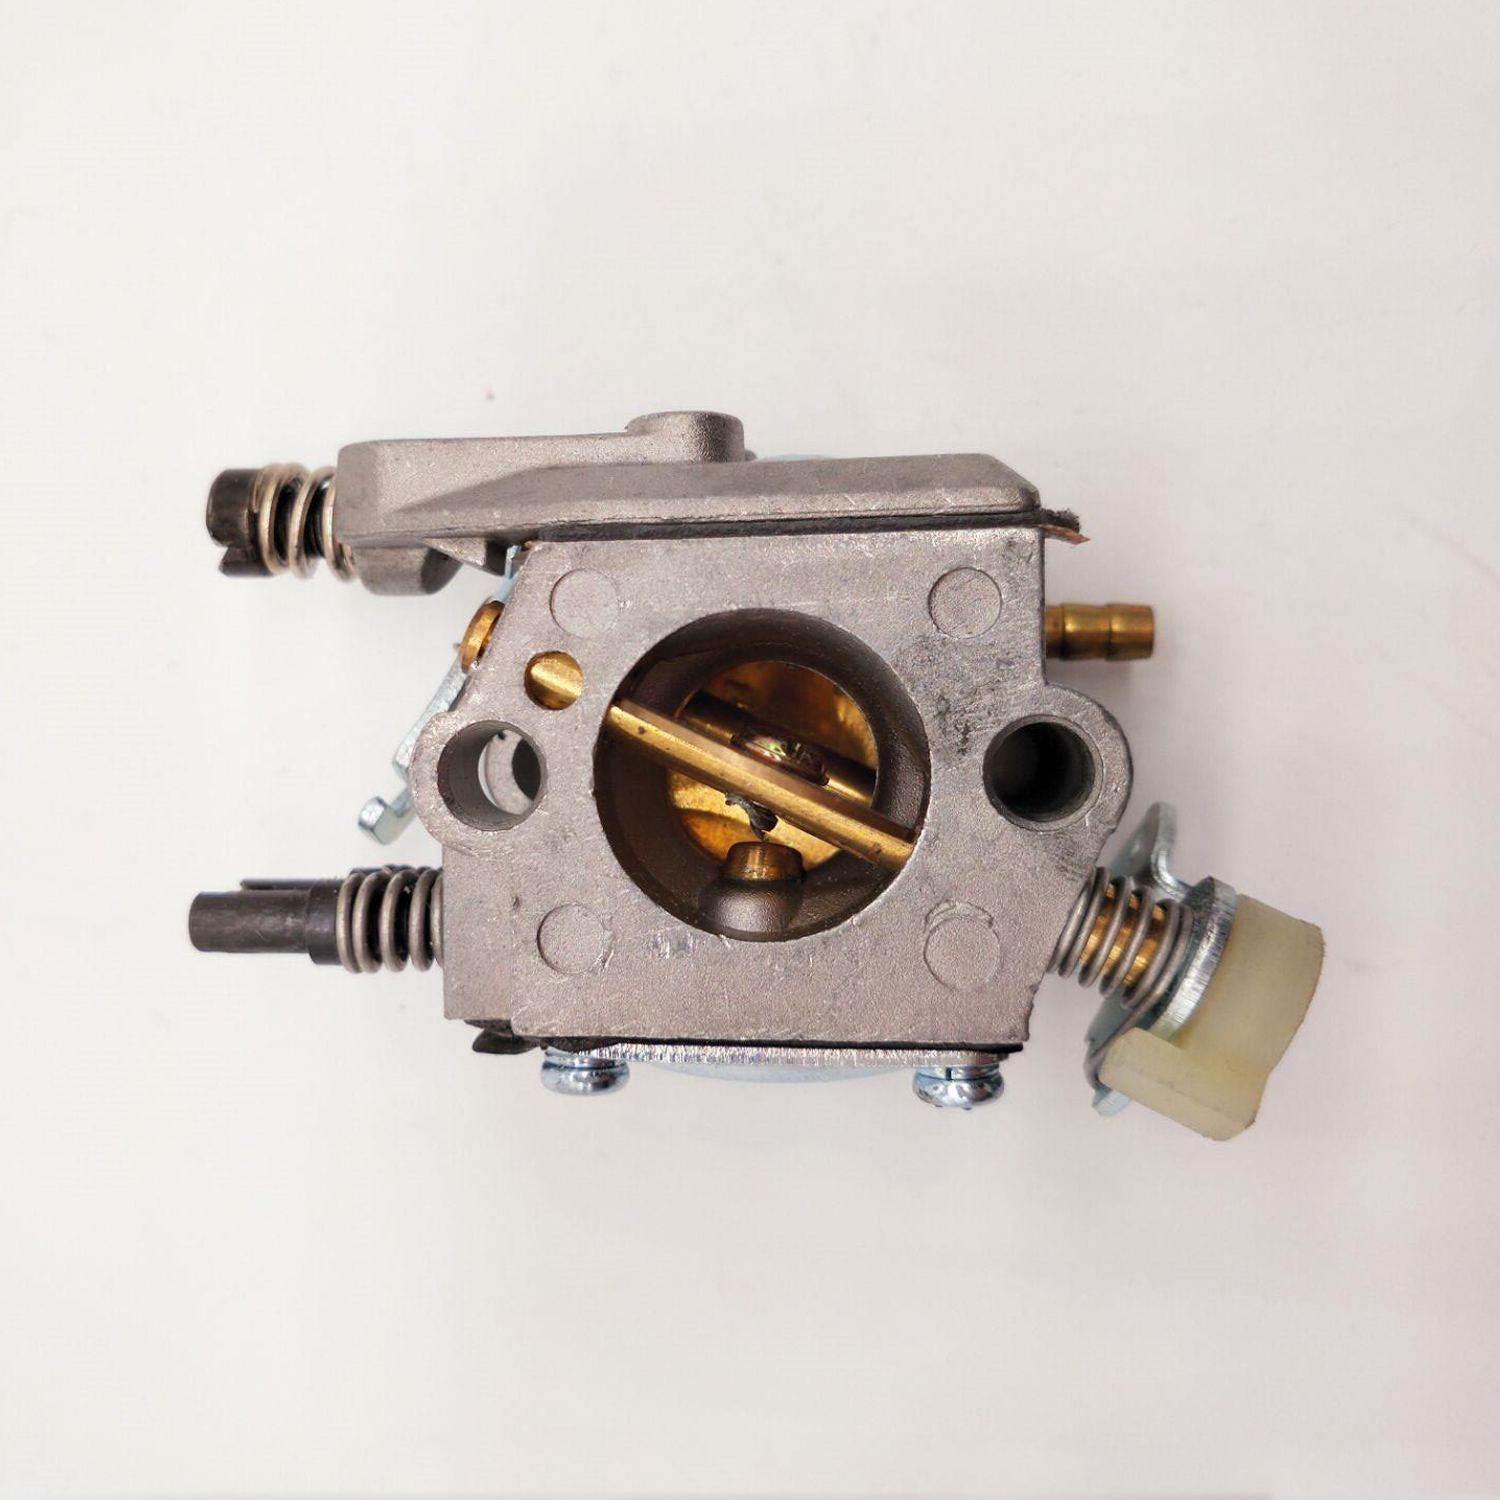 Zama Replacement Carburetor C1Q-EL6 for Husky Saw H51  55 Chainsaws